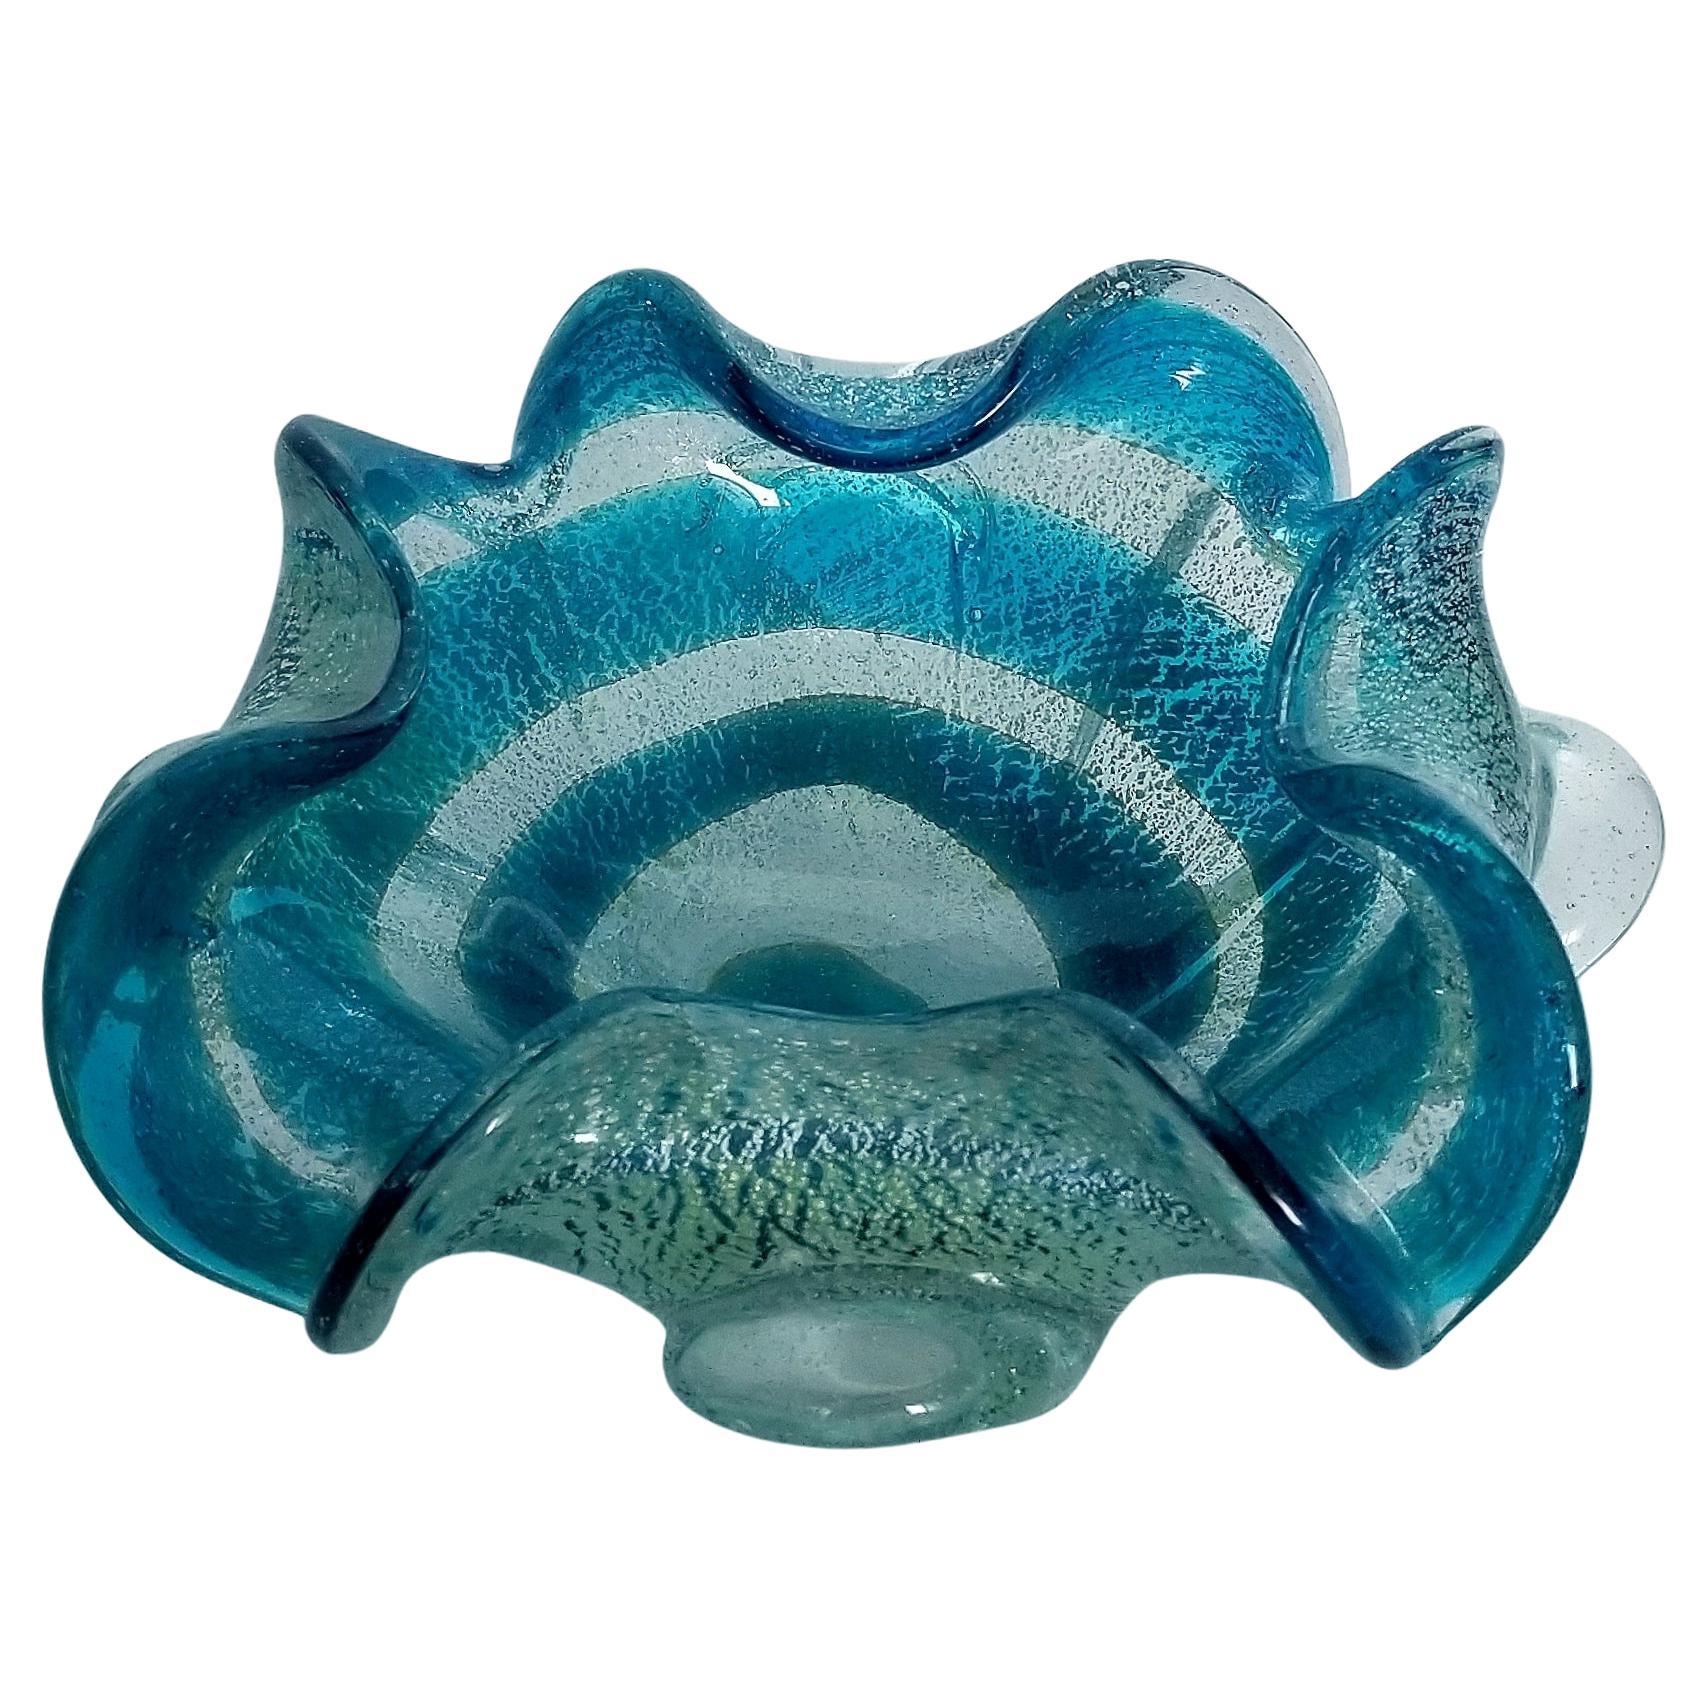 Blue and Silver Murano Glass Ashtray or Catch-all Bowl For Sale 6